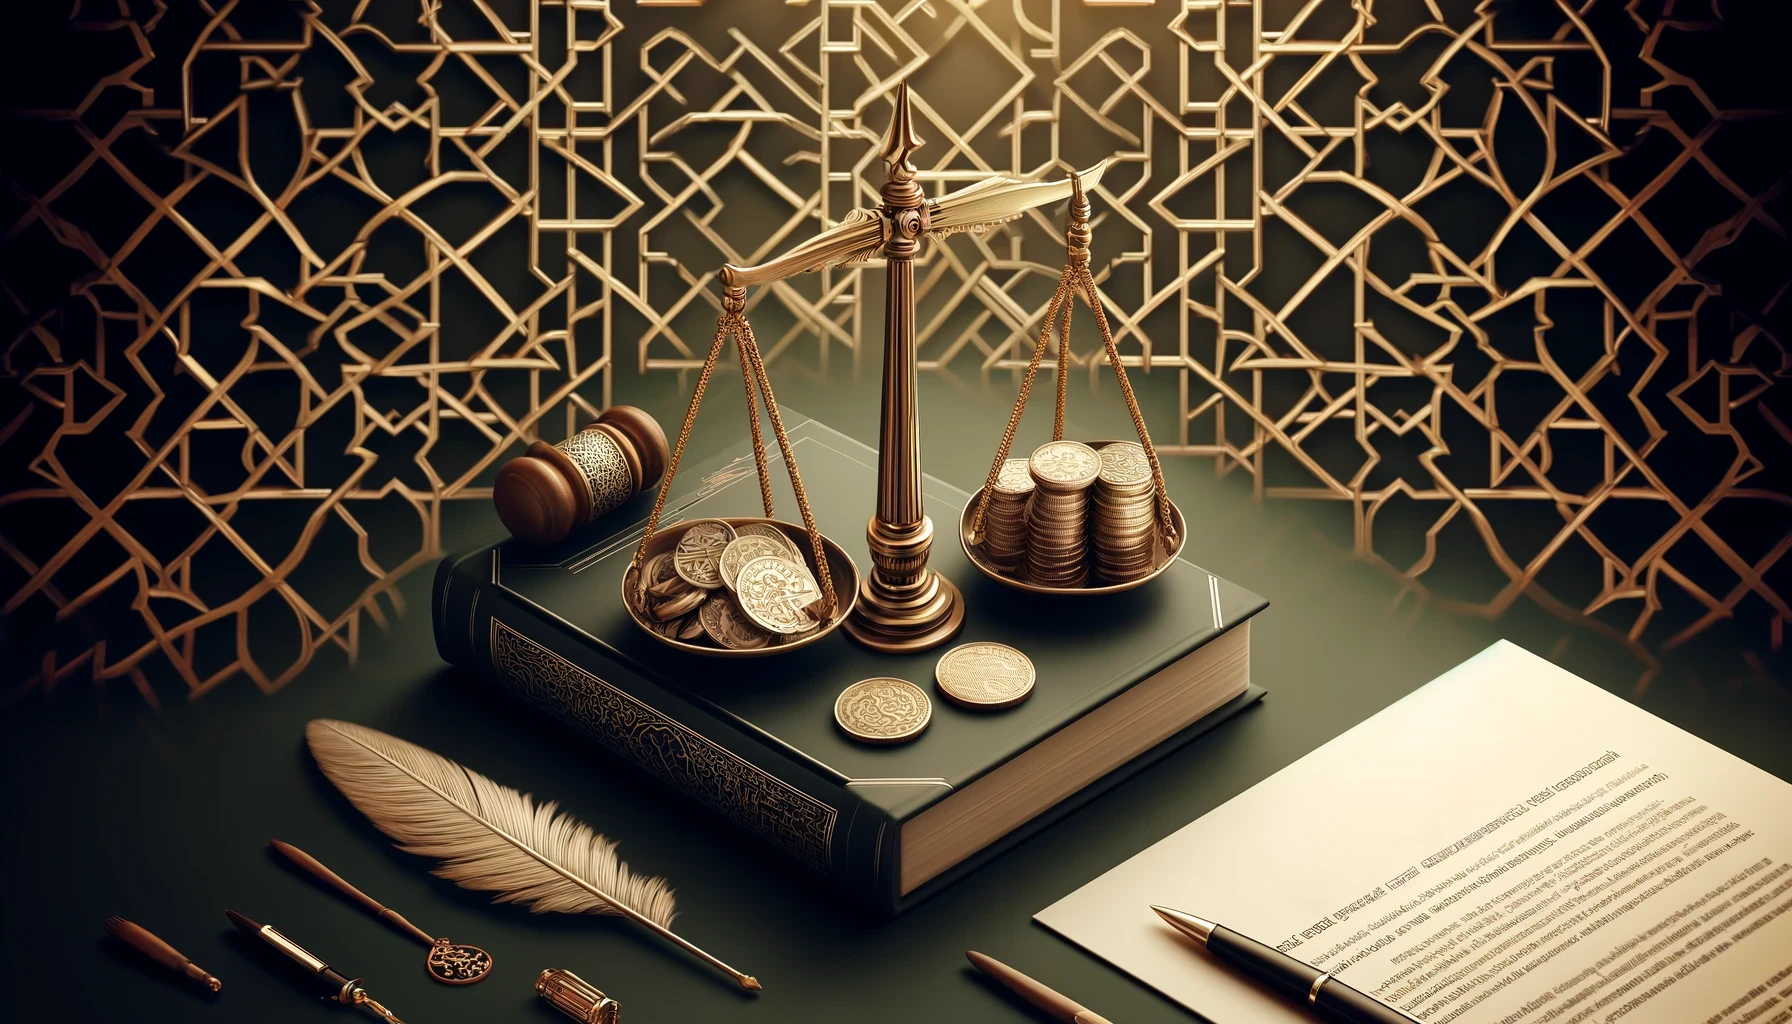 Modern and professional blog header featuring a geometric Islamic pattern in green and gold, with a graph showing interest rates, a calculator, and financial documents